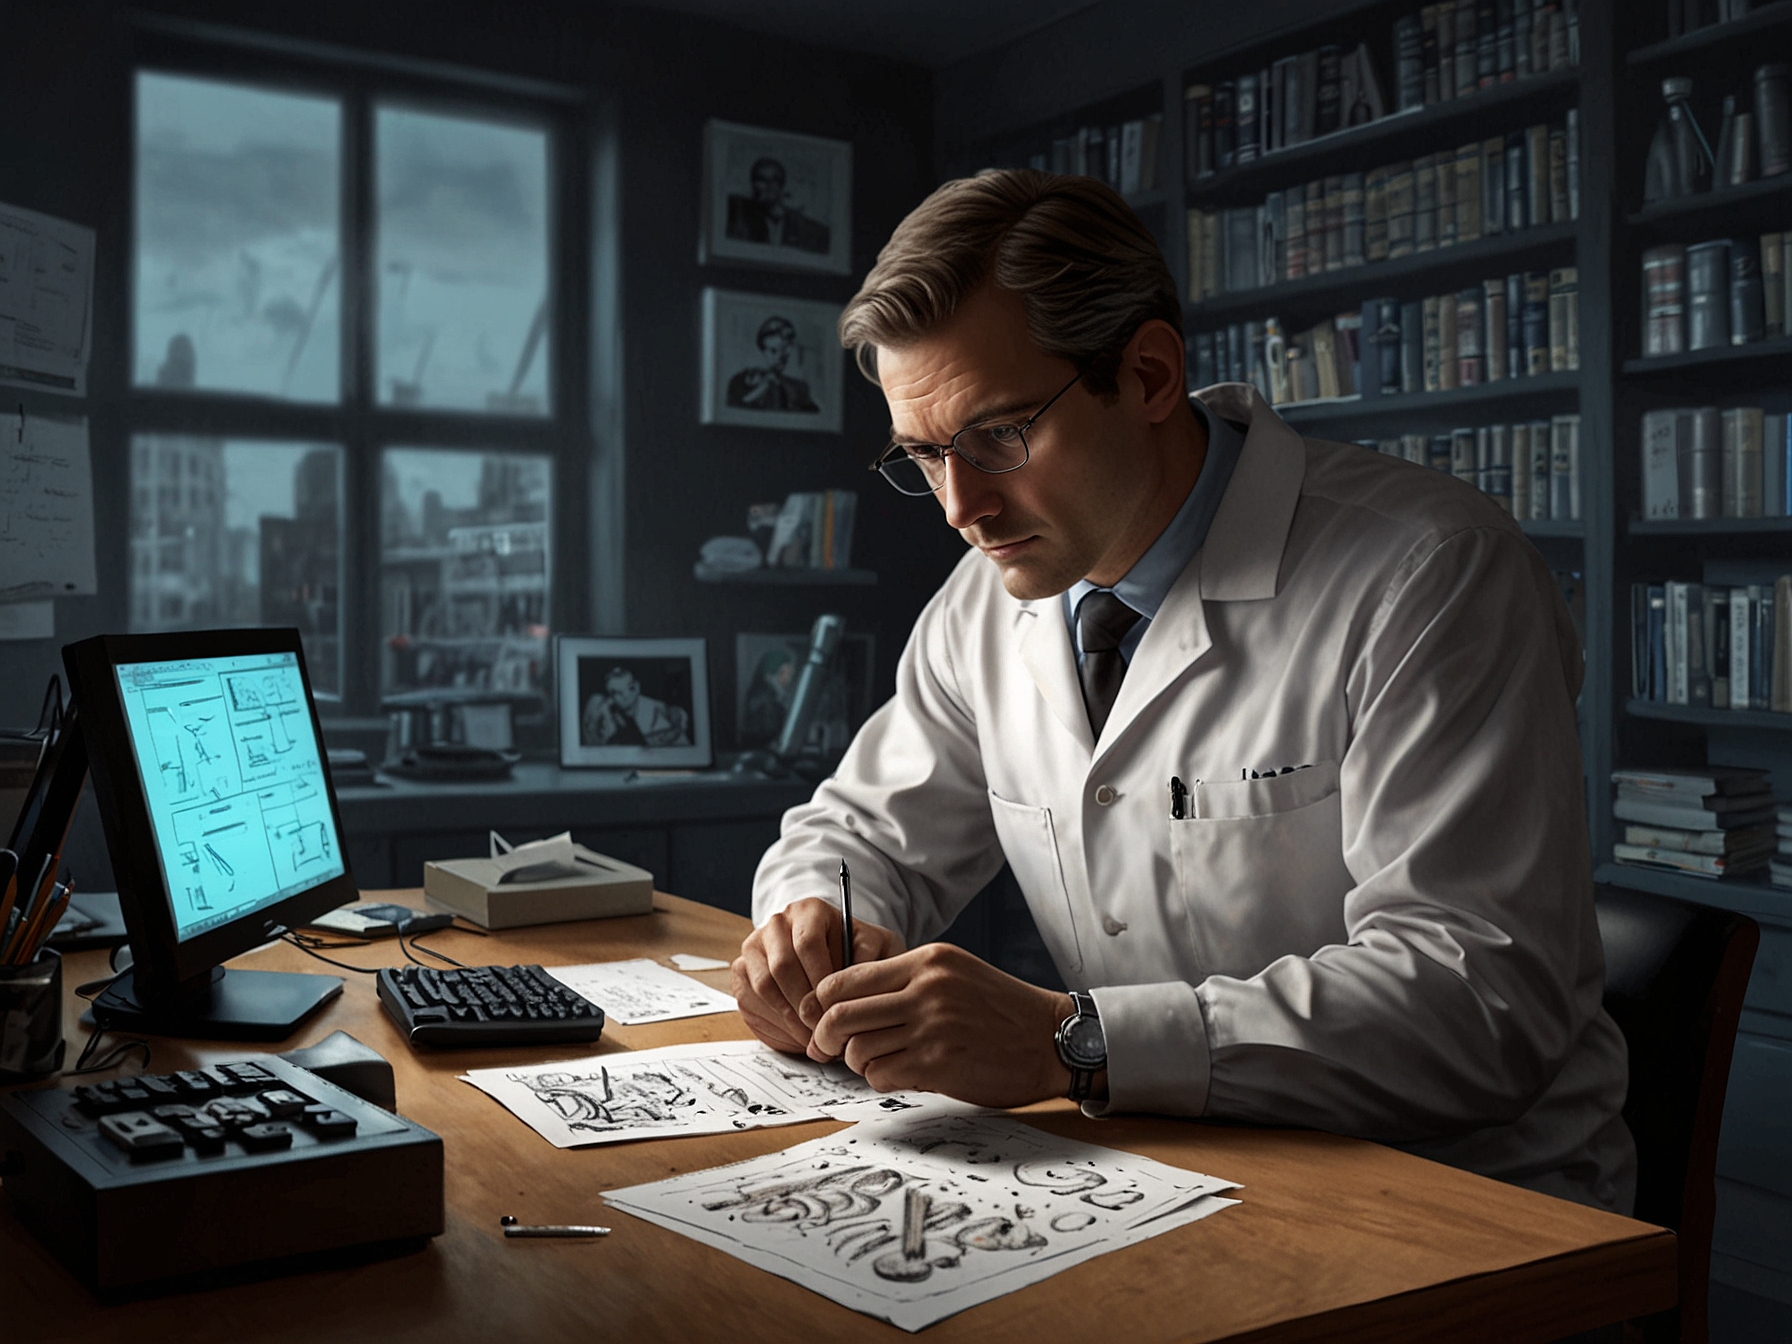 An investigator examining old evidence from the Tice & Gilmour case, with modern forensic tools like DNA sequencers and fingerprint analysis kits in the background, showcasing the evolution in technology.